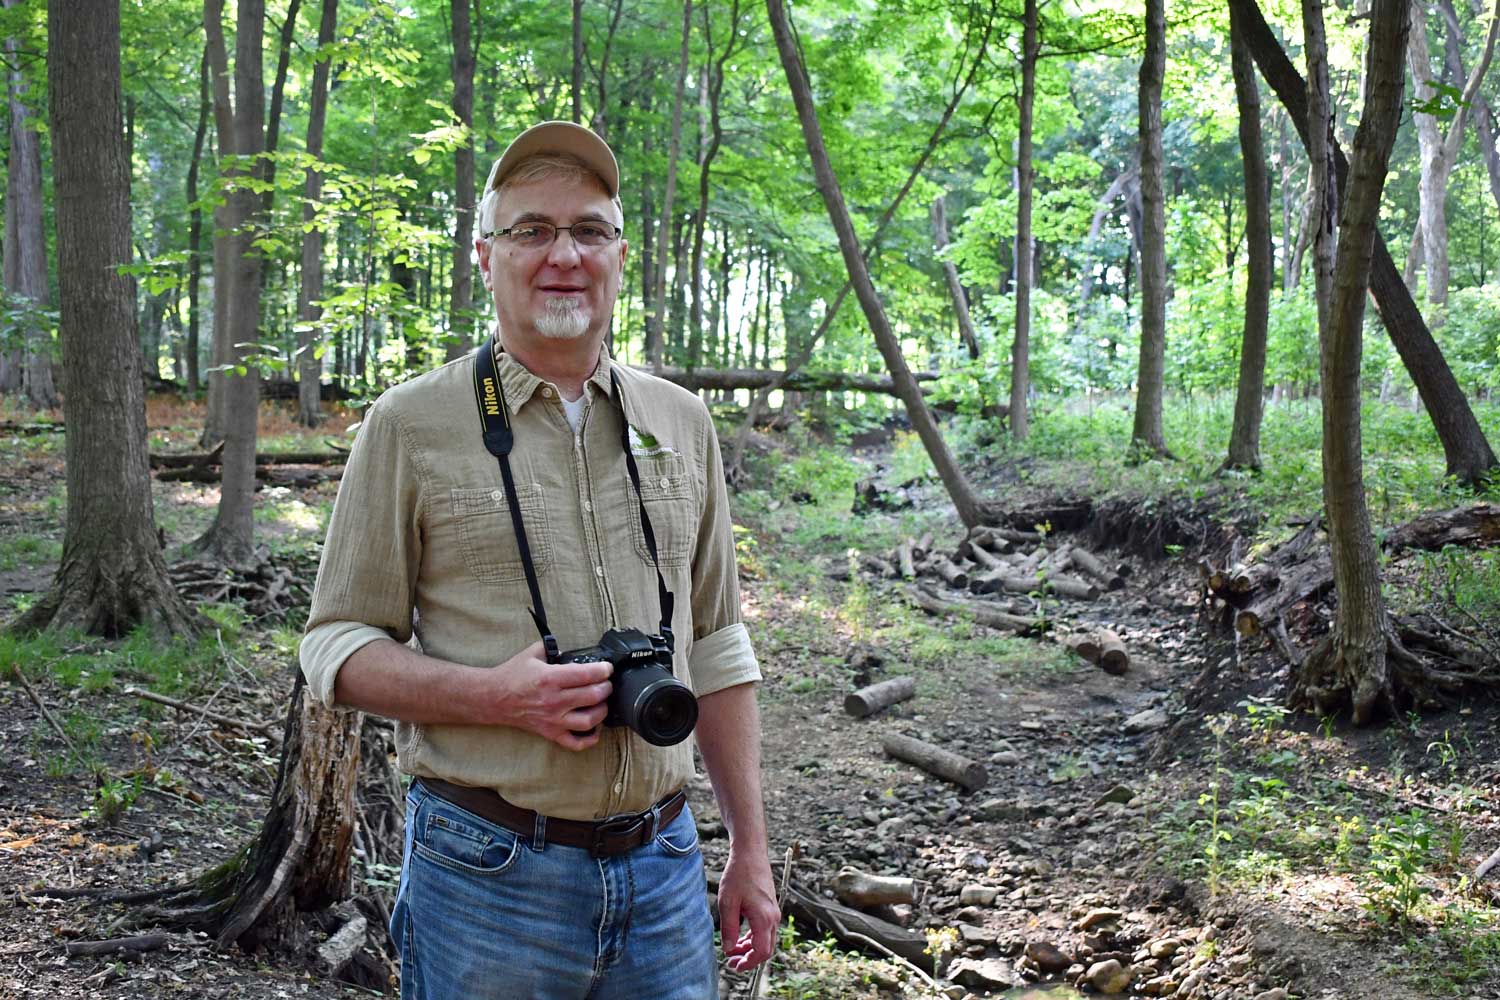 A person standing in a forest with a camera.